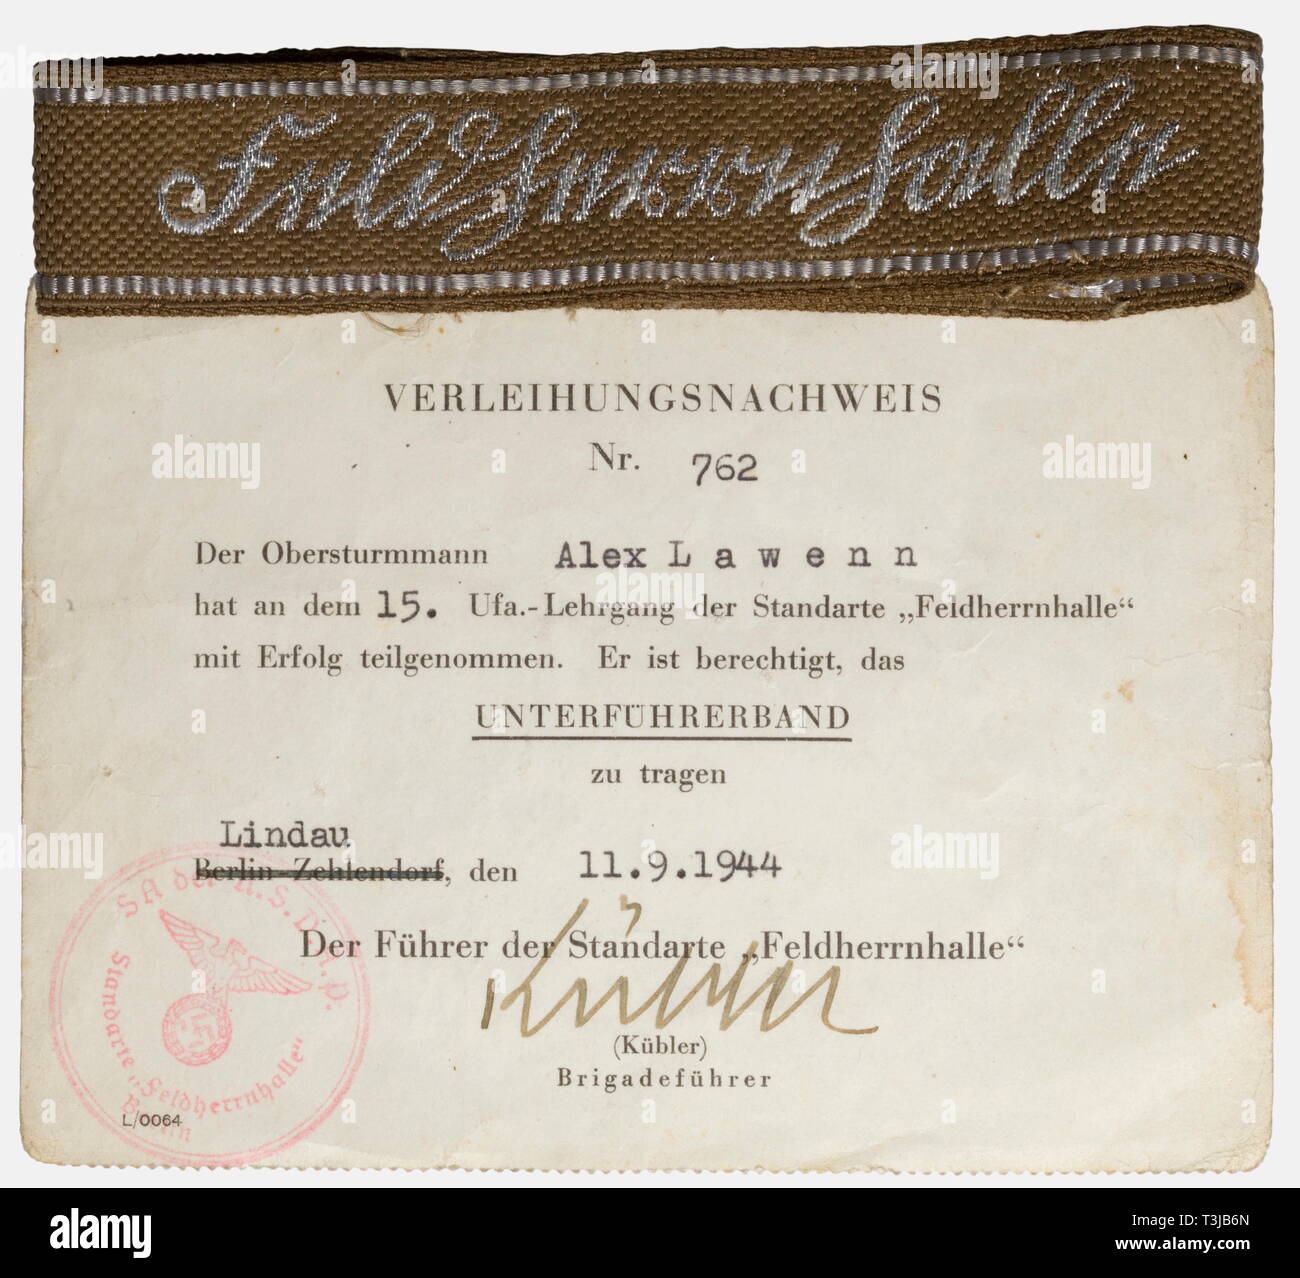 A cuff title for junior officers of the SA Standarte "Feldherrnhalle", with award certificate Cuff title with silver-woven name designation in Sütterlin script (so-called "flatwire") and borders of silver-grey artificial silk. Length about 41 cm. Included is the award certificate, Nr. 762 dated 11 September 1944 with original ink signature of Brigadeführer Kübler. historic, historical, 1930s, 20th century, storm battalion, stormtroopers, armed and uniformed branch of the NSDAP, organisation, organization, organizations, organisations, NS, National Socialism, Nazism, Third R, Editorial-Use-Only Stock Photo